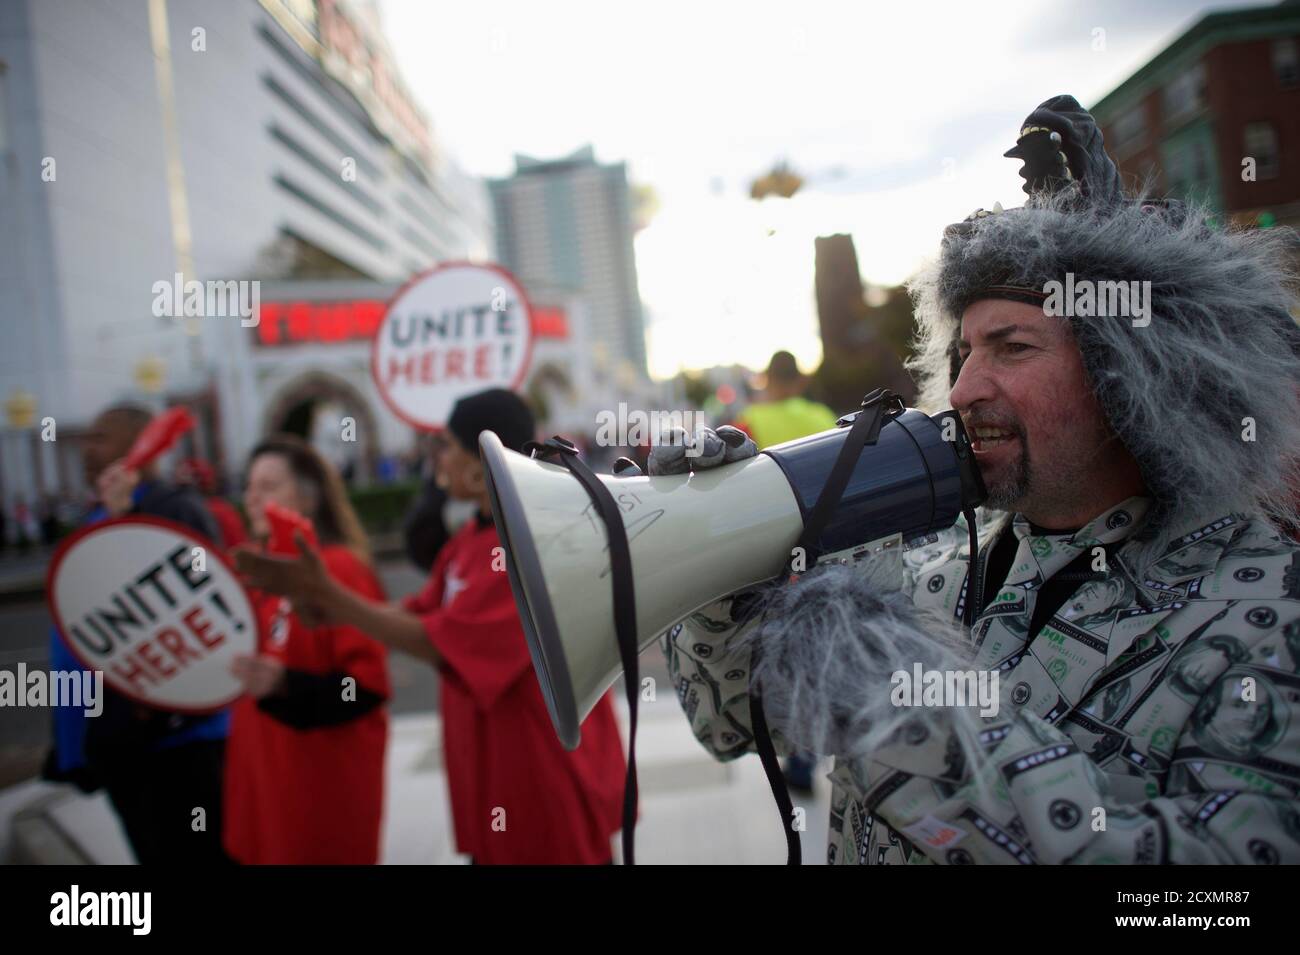 Paul Smith, dressed in a costume referring to the "Wolf of Wall Street,"  chants on a megaphone during a rally by union members from UNITE HERE Local  54 outside the Trump Taj